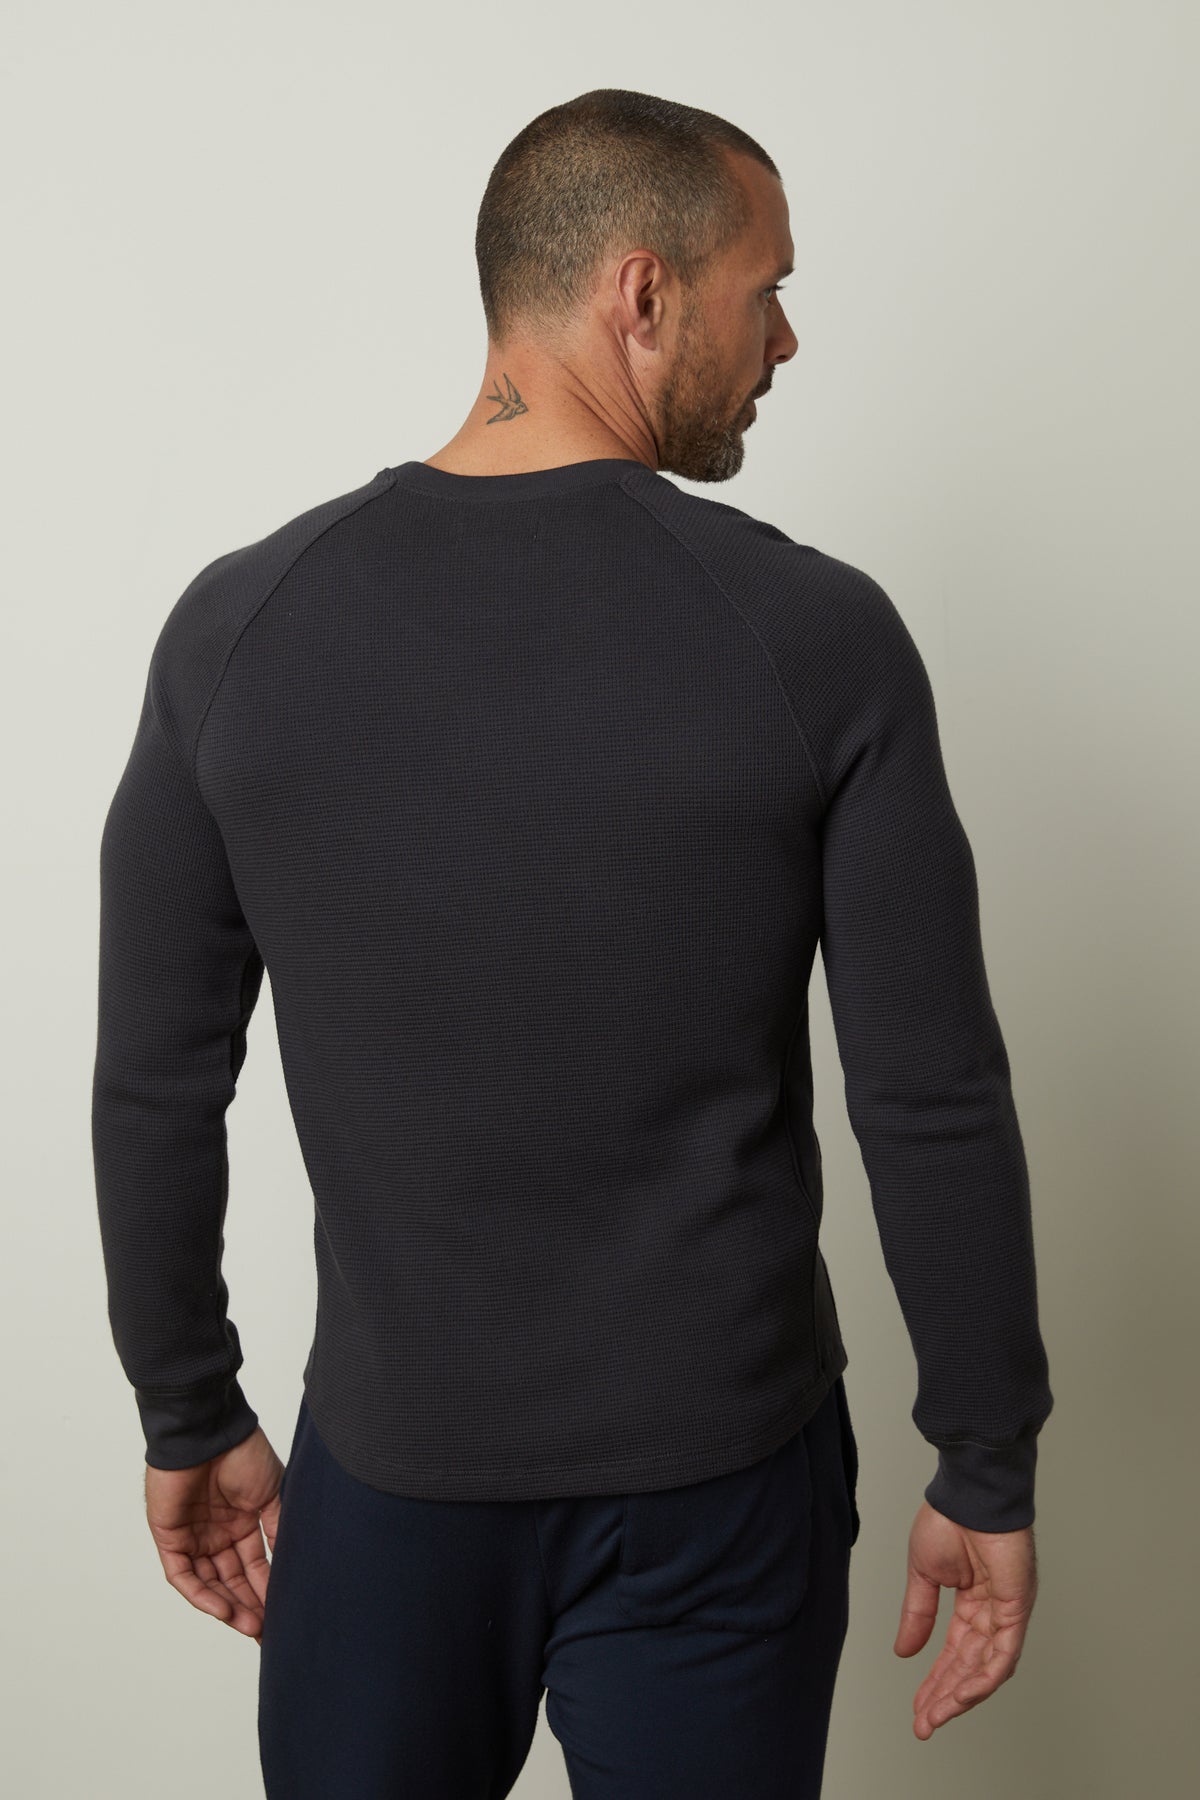   The man wearing a grey sweatshirt has a comfortable fit with the Velvet by Graham & Spencer GLEN THERMAL CREW. 